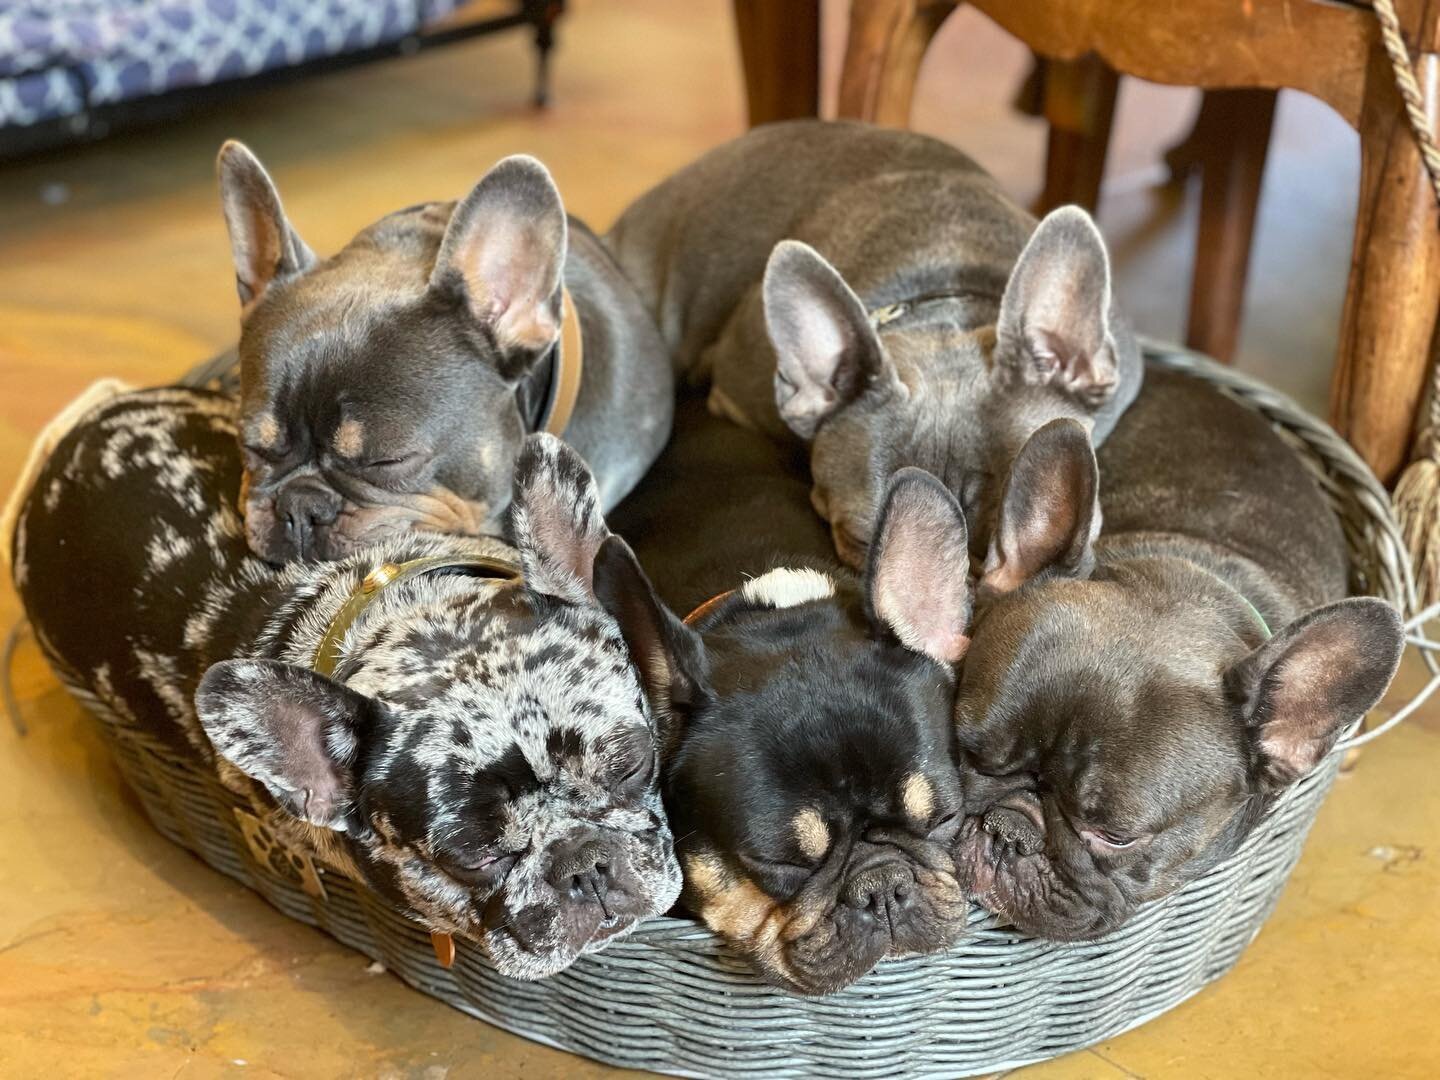 It can&rsquo;t get better than a basket full of Frenchies!!!!!!

#frenchiecrew#frenchieoverload#frenchievids#frenchiefun#frenchie1#frenchielove_feature#frenchiemoments#cutefrenchie#cutefrenchies#cutefrenchbulldogs#bestfrenchie#bestfrenchies#rarefrenc